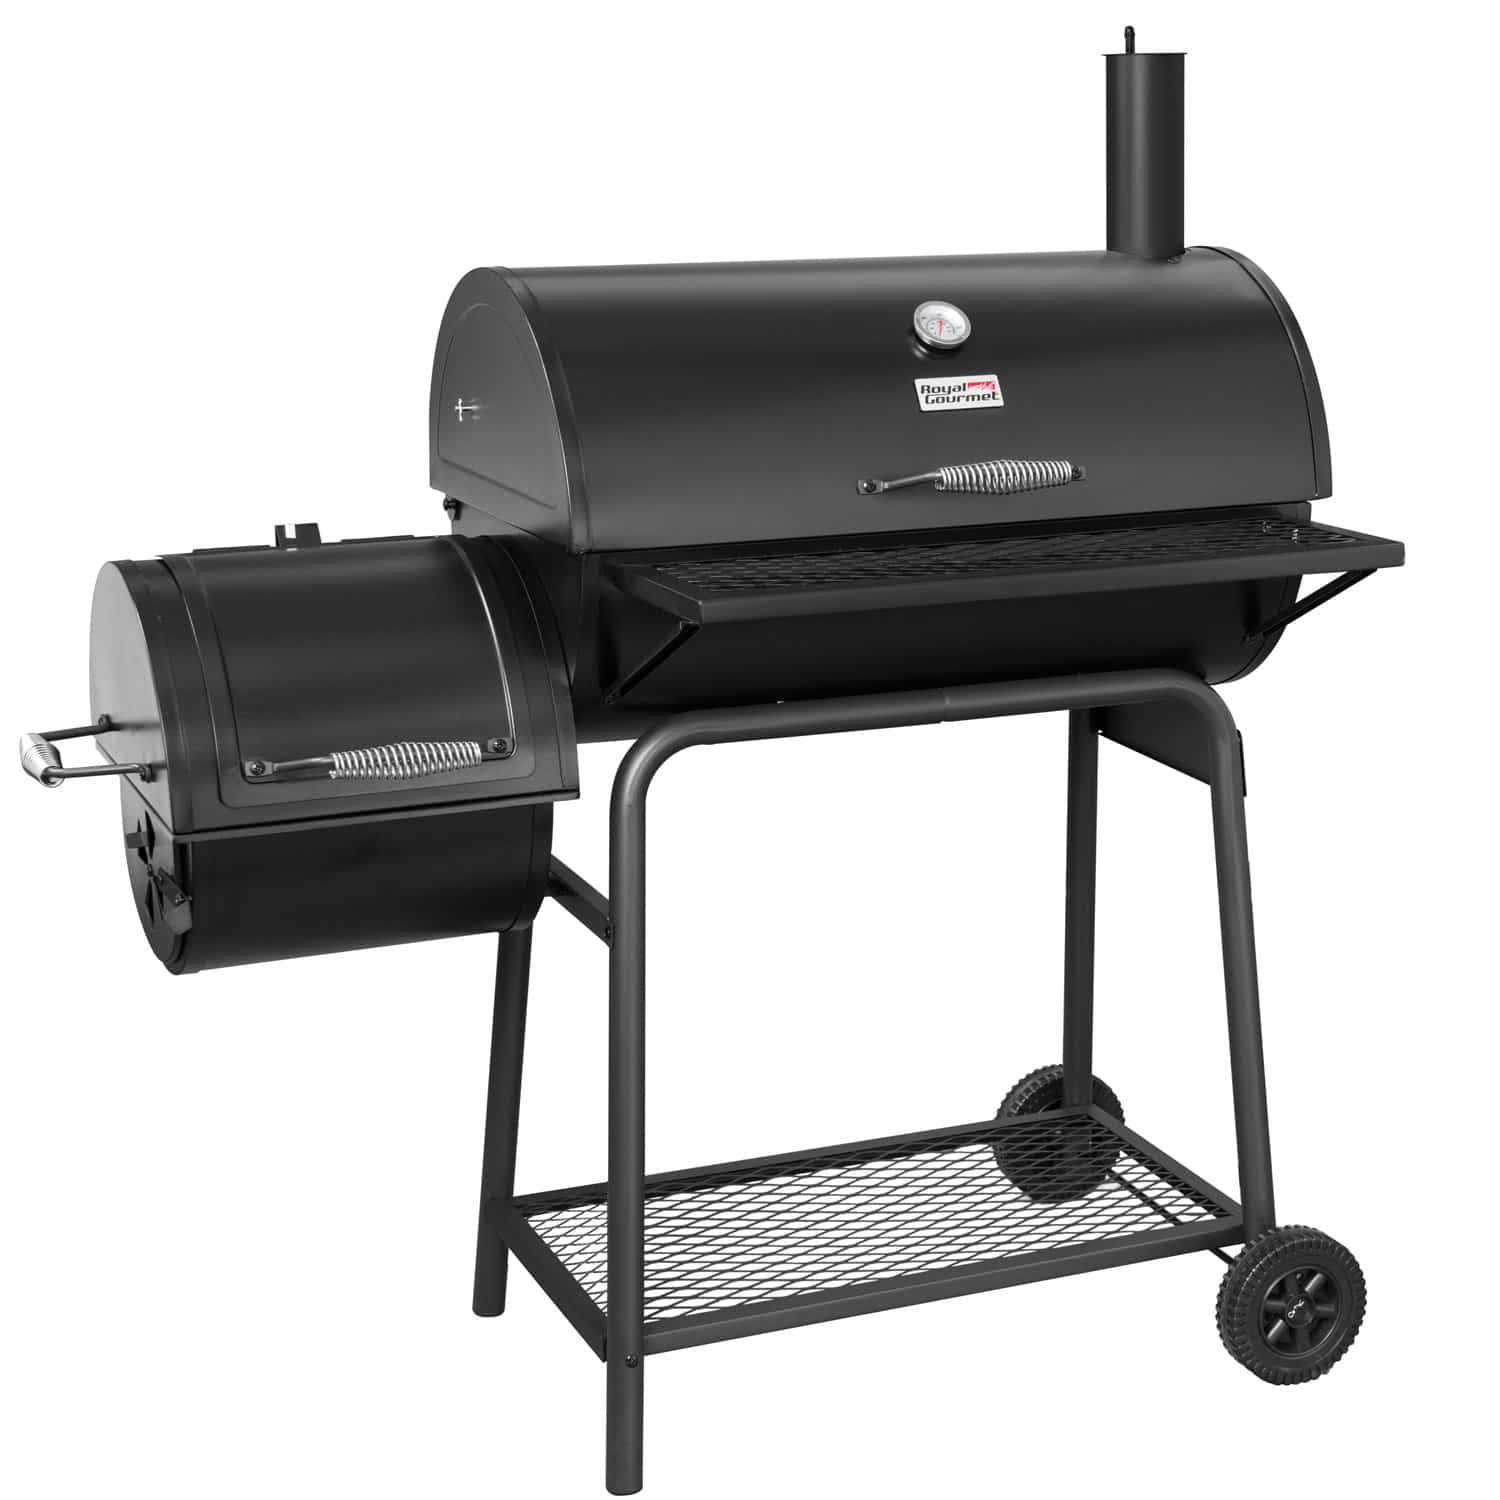 Royal Gourmet BBQ Charcoal Grill with Offset Smoker